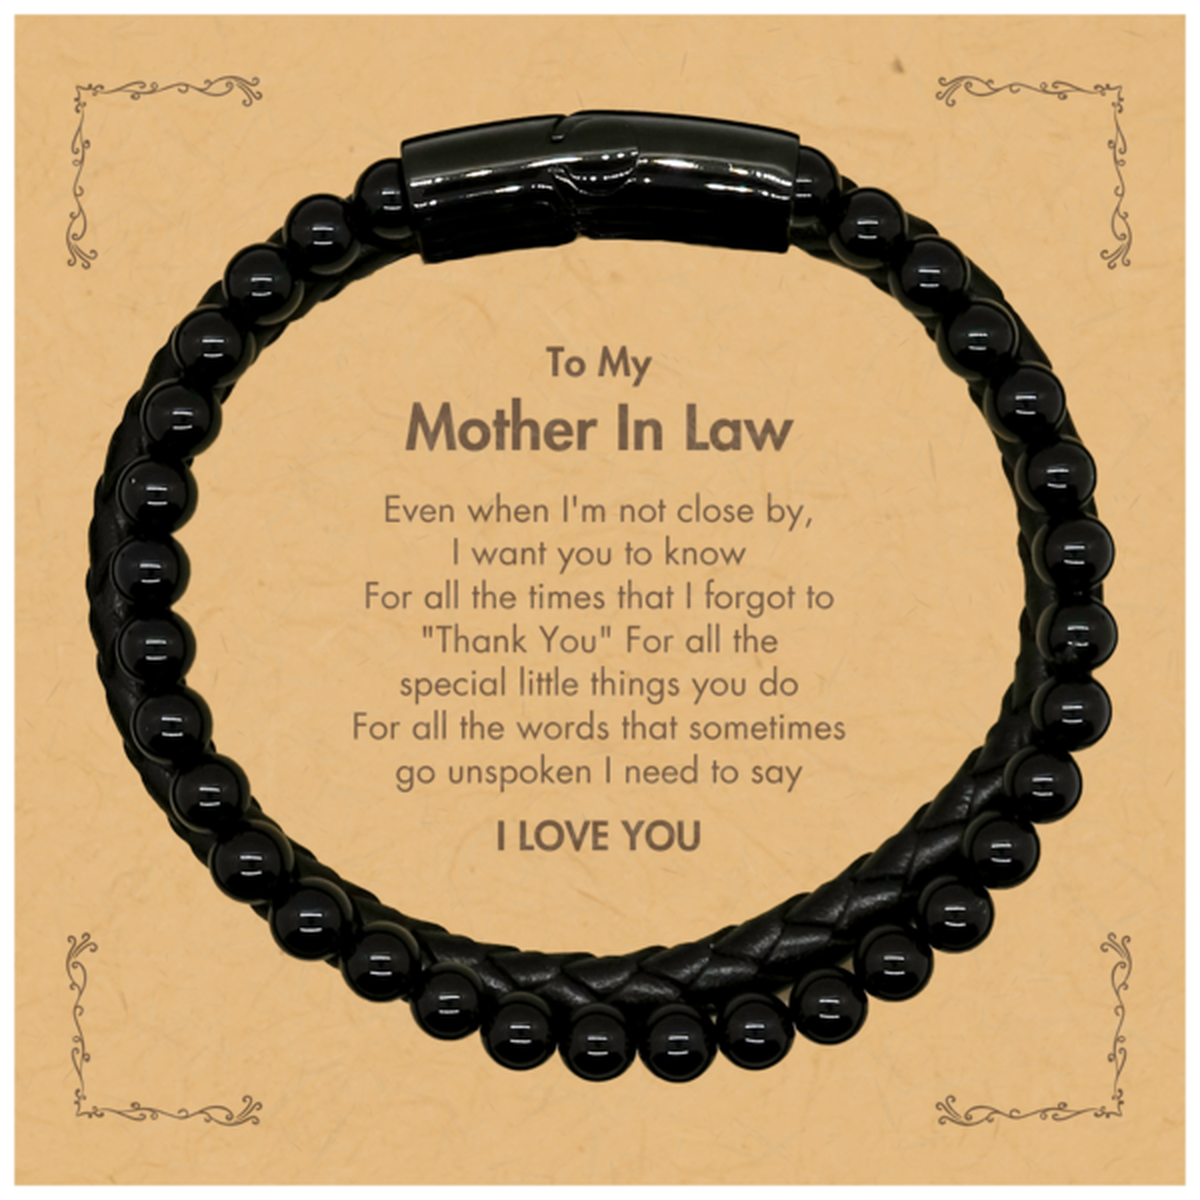 Thank You Gifts for Mother In Law, Keepsake Stone Leather Bracelets Gifts for Mother In Law Birthday Mother's day Father's Day Mother In Law For all the words That sometimes go unspoken I need to say I LOVE YOU